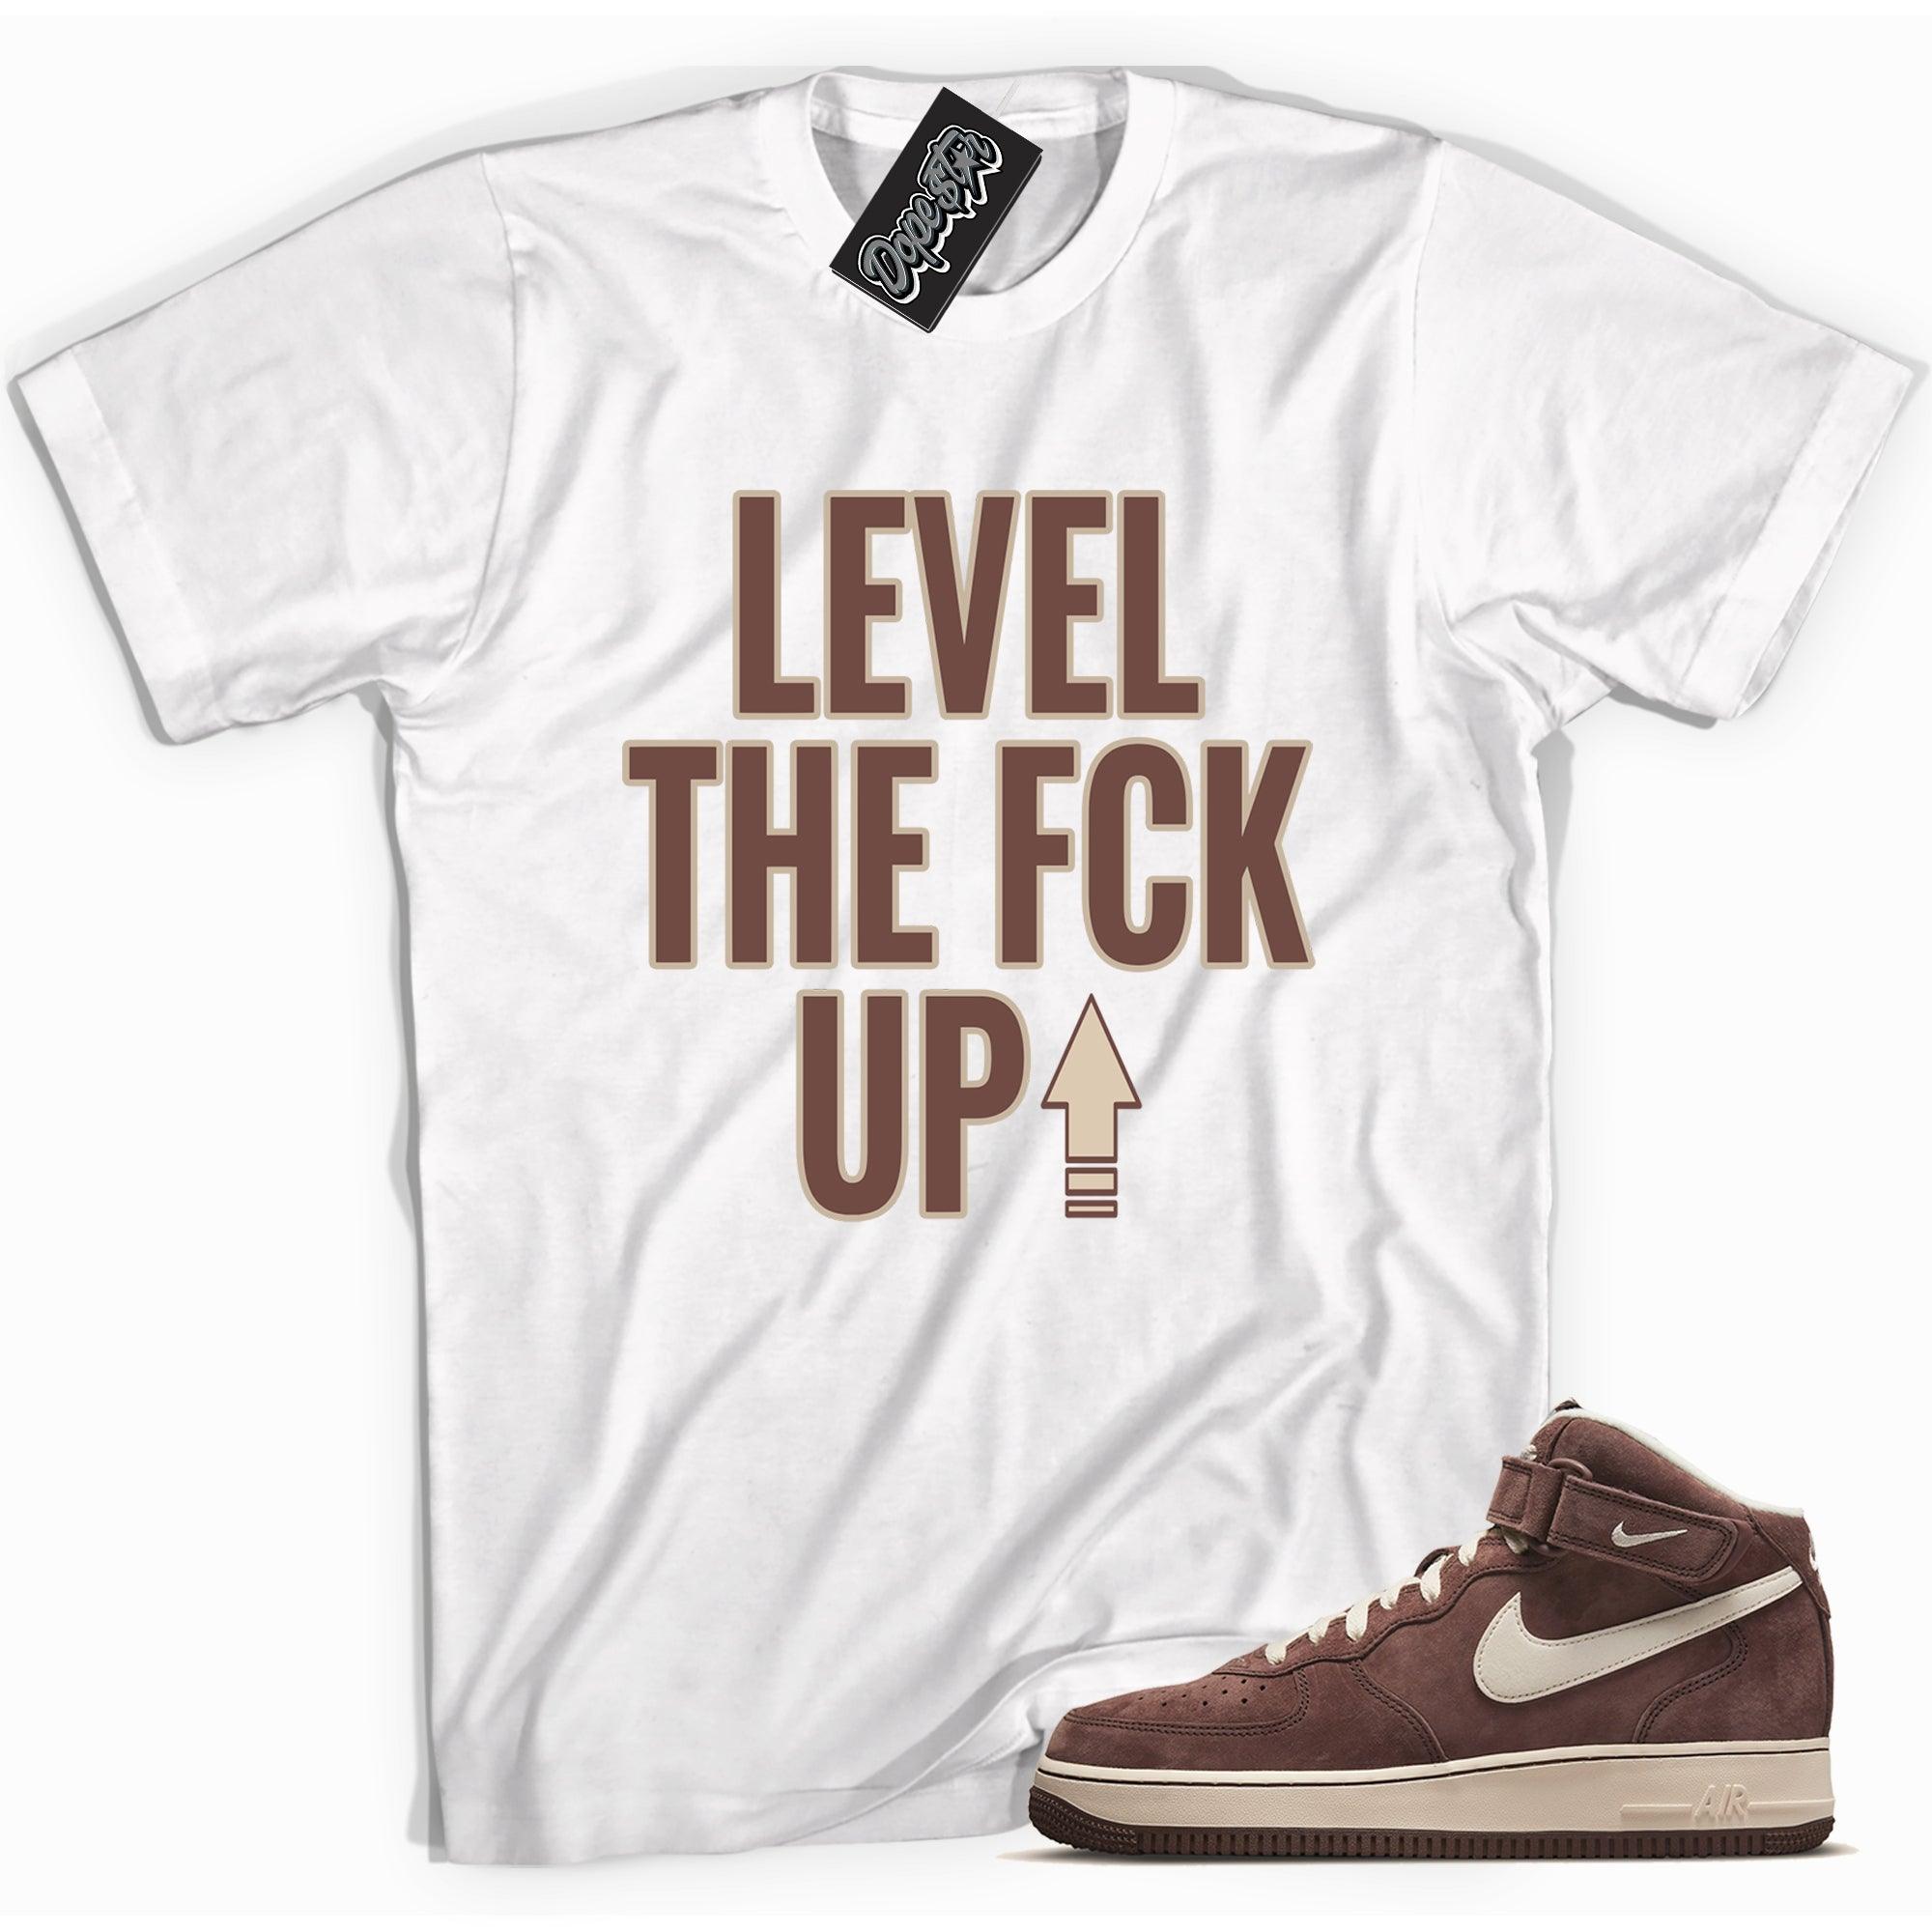 Cool white graphic tee with 'Level Up' print, that perfectly matches Nike Air Force 1 Mid QS Chocolate sneakers.